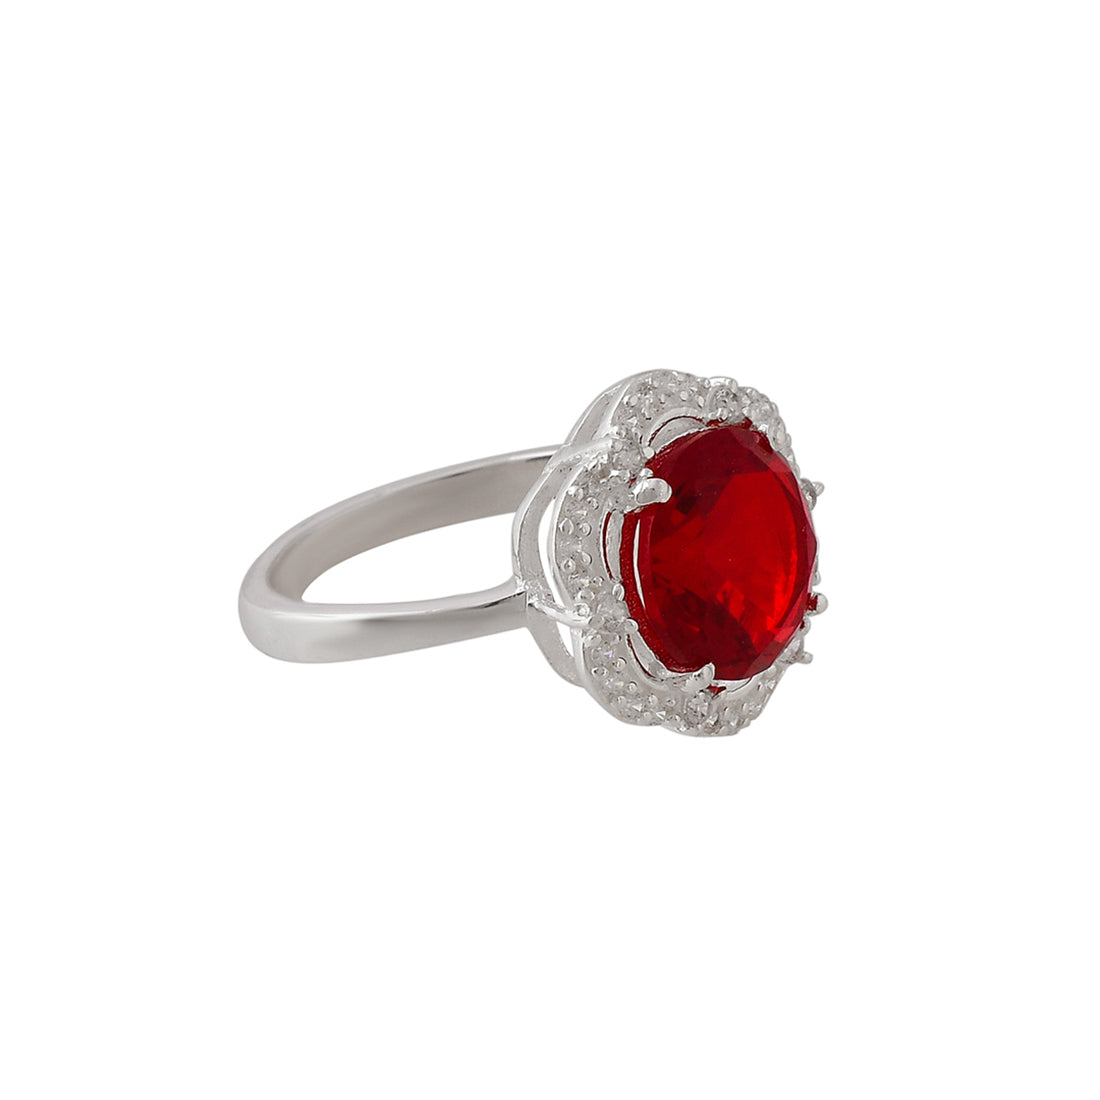 Women's Round Cut Red Ruby Cluster Setting 925 Sterling Silver Ring - Voylla